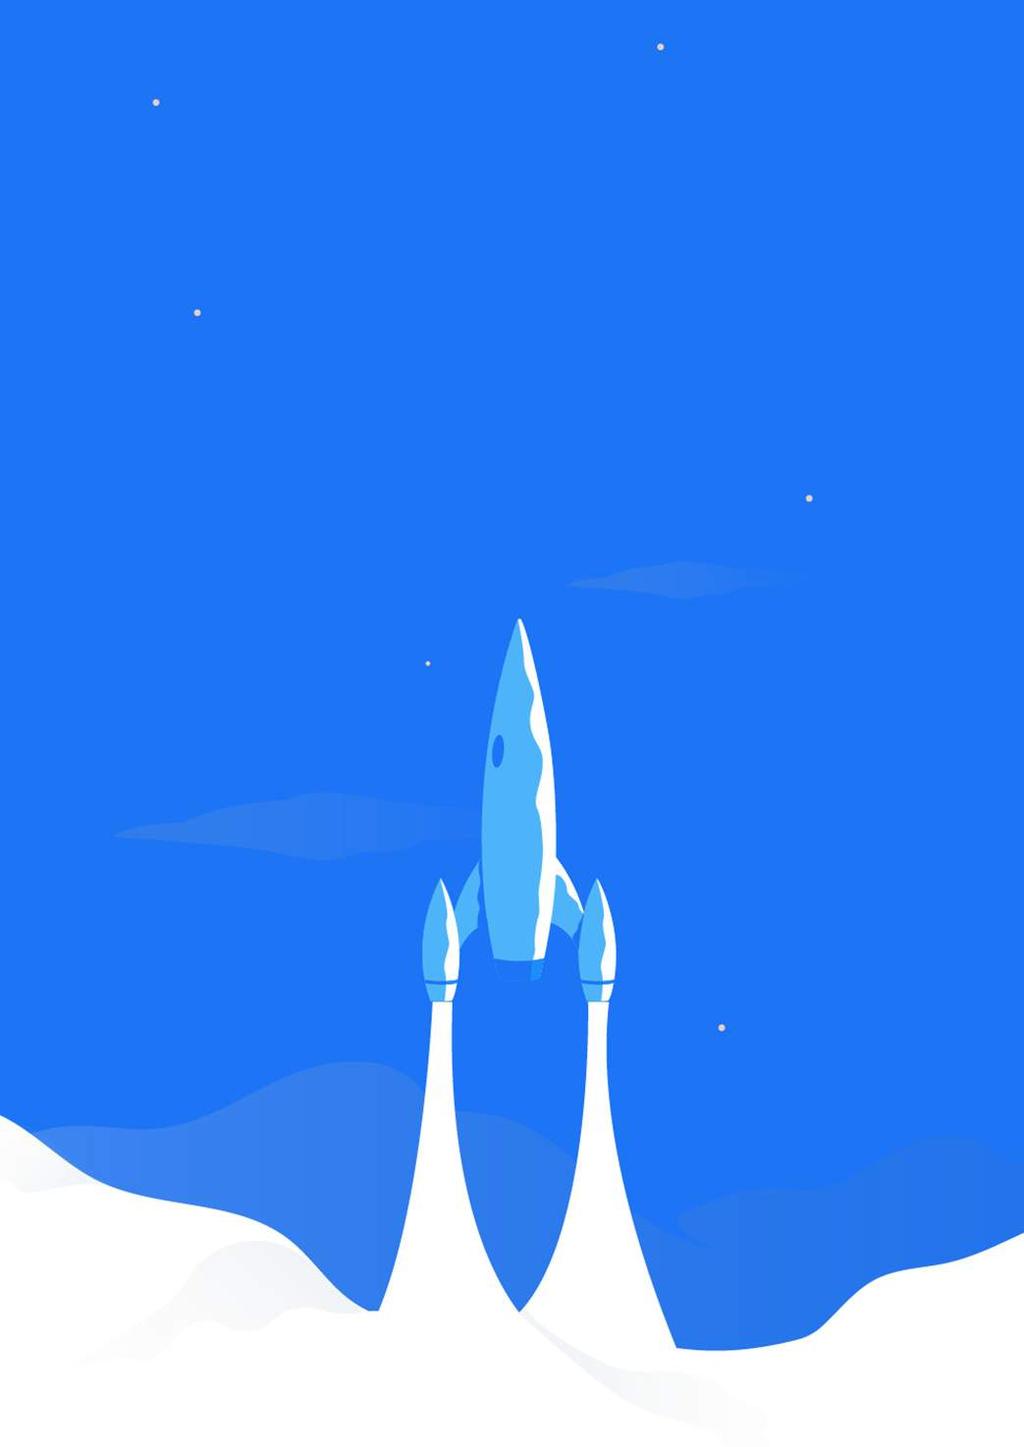 POINTS OF CONTACT Once onboarding is complete, partners will receive access to Rocket.Chat s team through our community server: https://open.